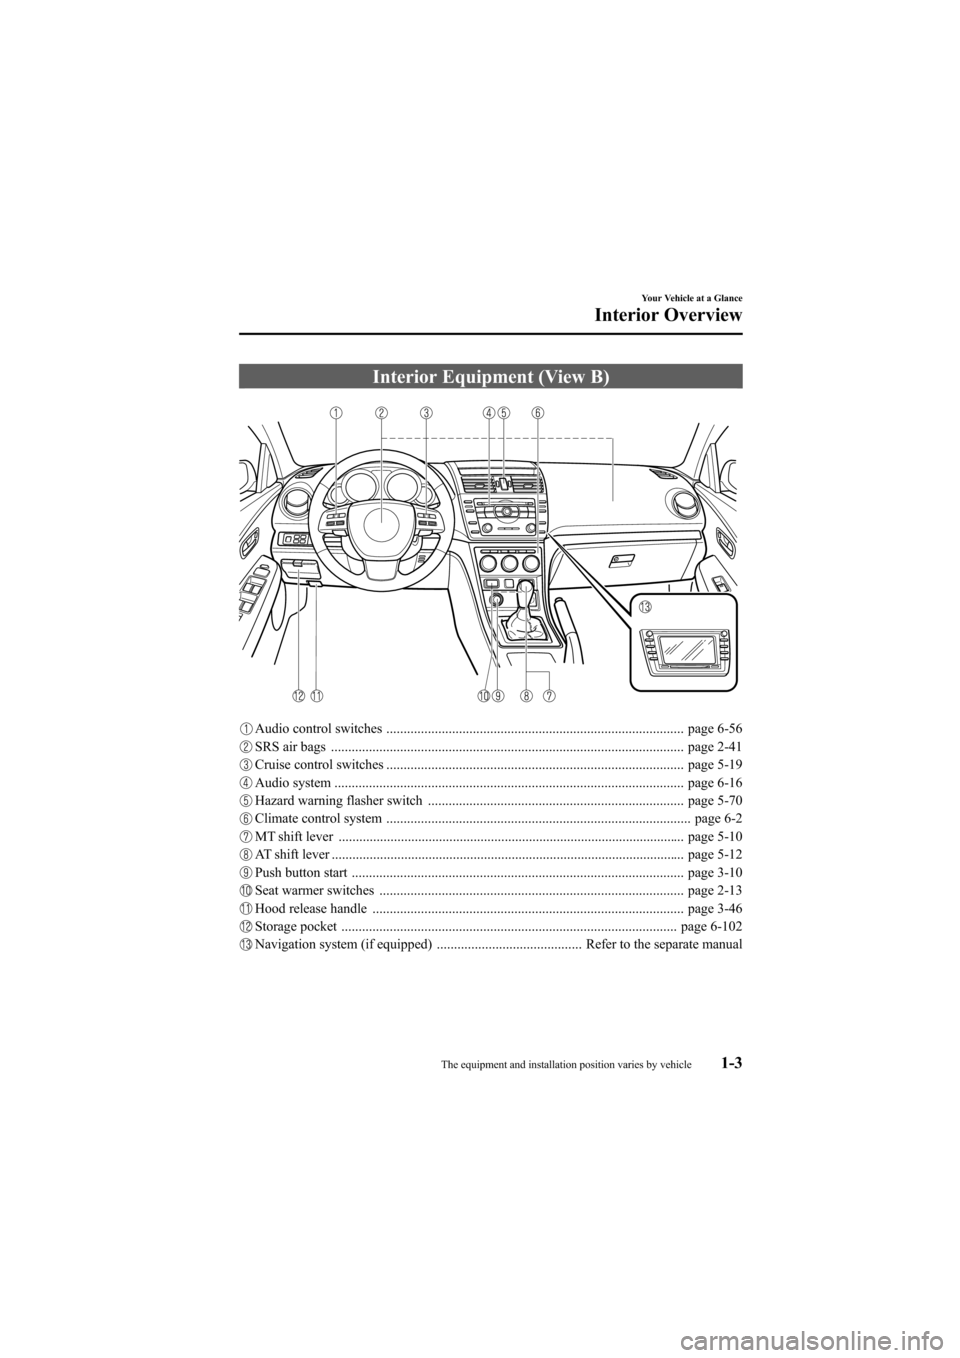 MAZDA MODEL 6 2009  Owners Manual (in English) Black plate (9,1)
Interior Equipment (View B)
Audio control switches ...................................................................................... page 6-56
SRS air bags .....................